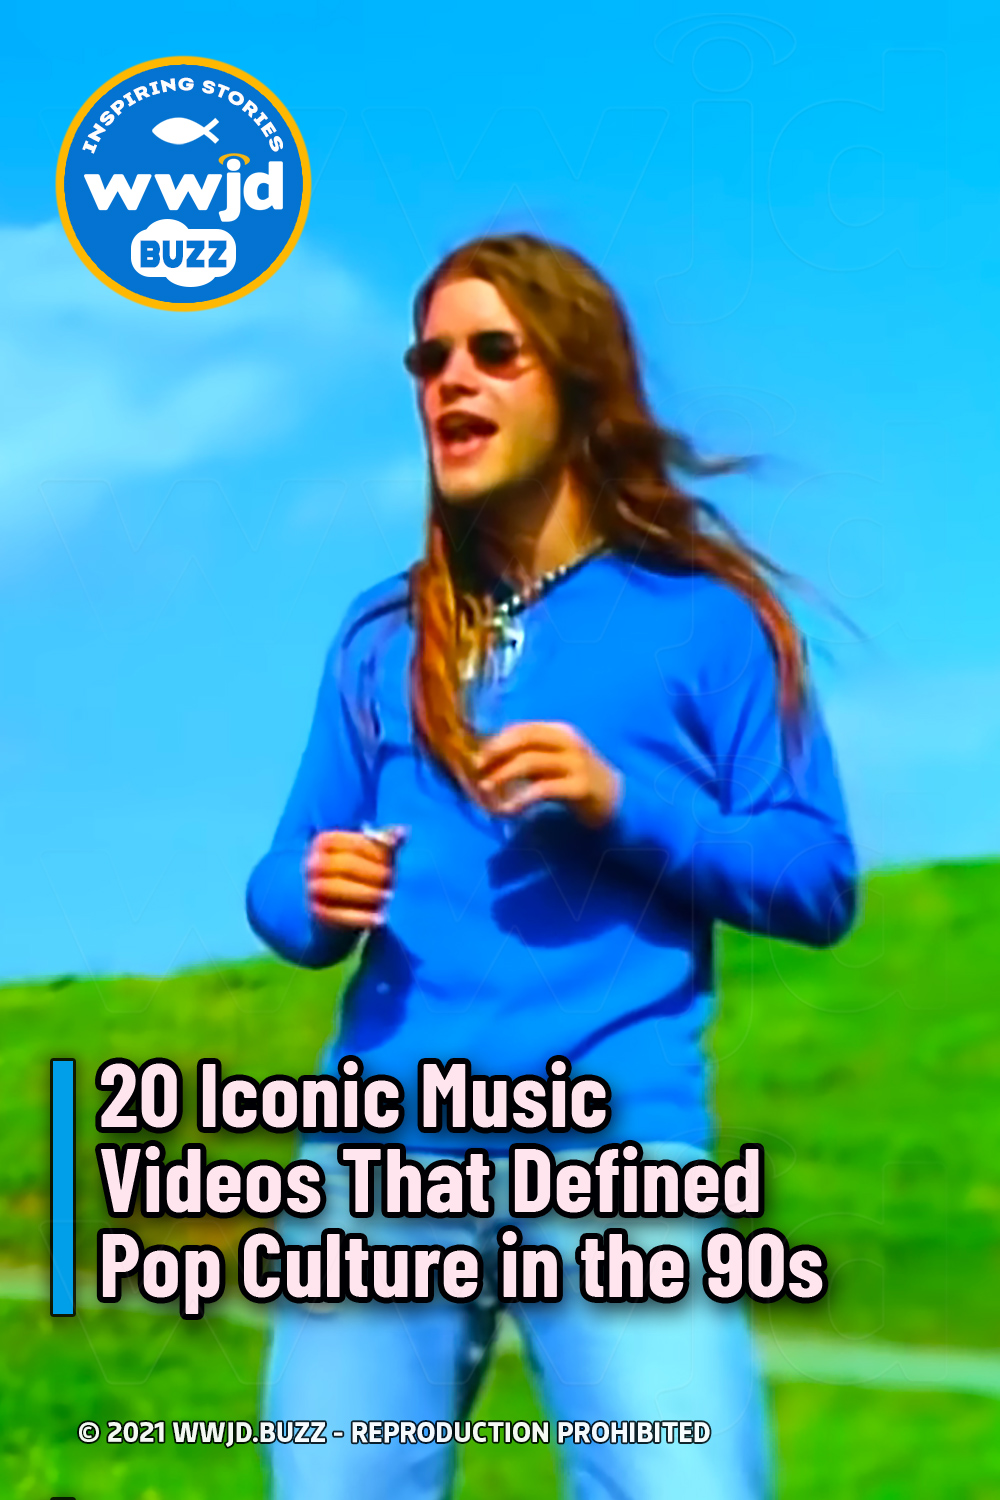 20 Iconic Music Videos That Defined Pop Culture in the 90s